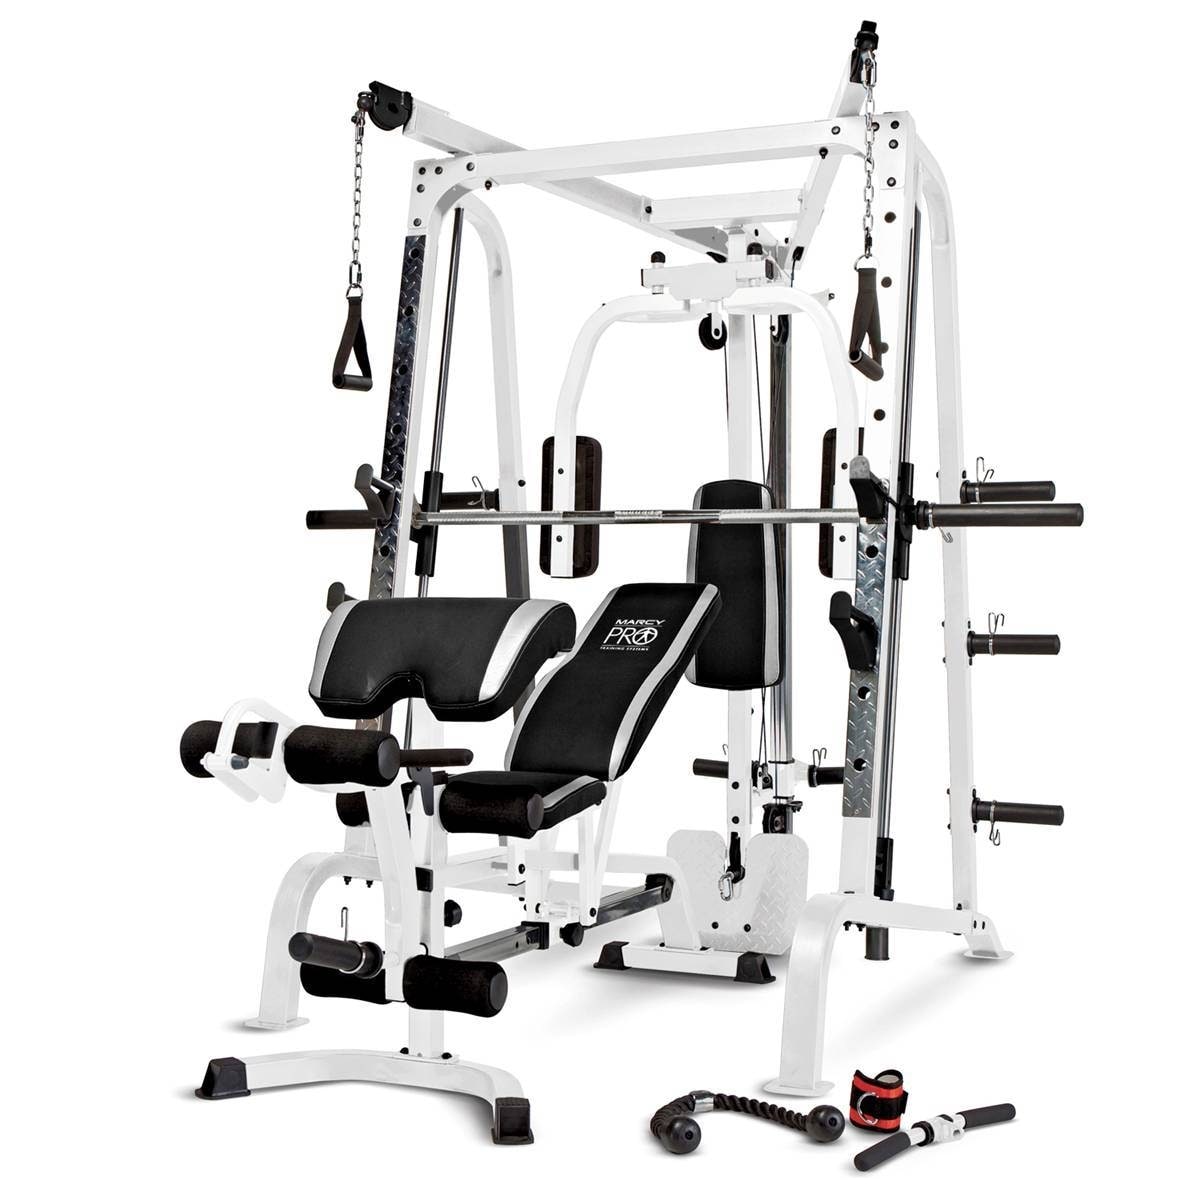 https://ak1.ostkcdn.com/images/products/is/images/direct/ecd66cd79471d4230294d0f86e36440f6c9aa7f9/Marcy-Pro-Smith-Cage-Workout-Machine-Total-Body-Training-Home-Gym-System%2C-White.jpg